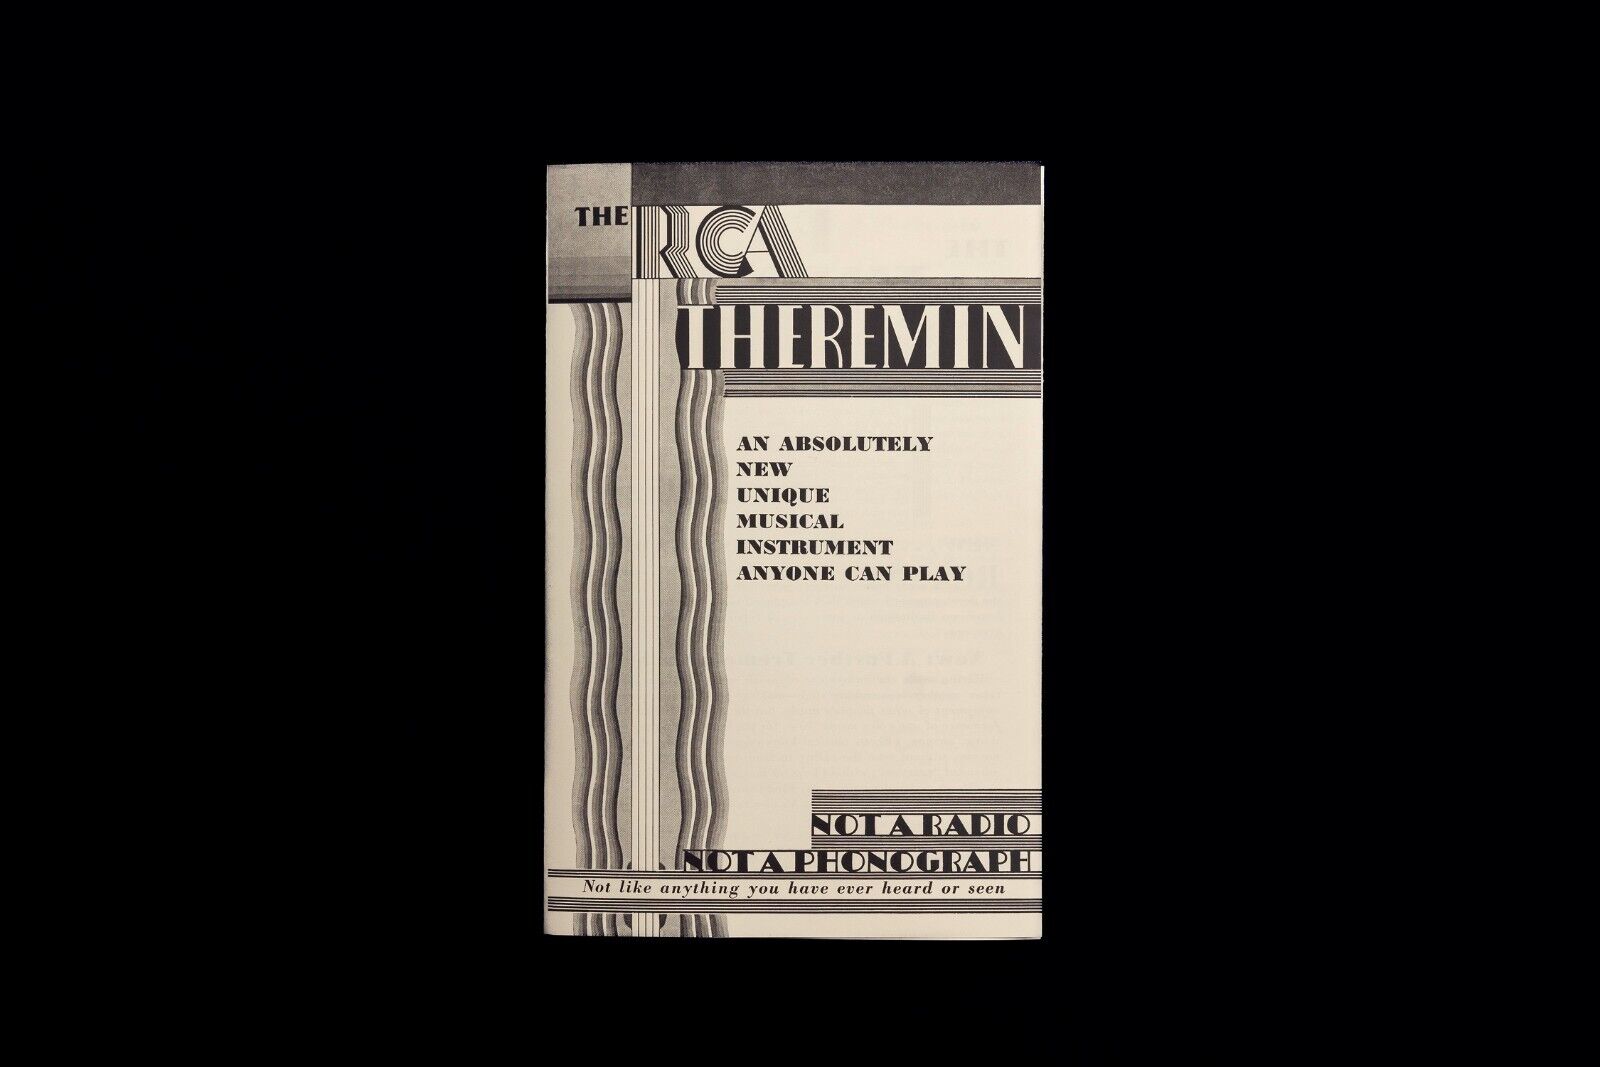 RCA Theremin Sales Brochure